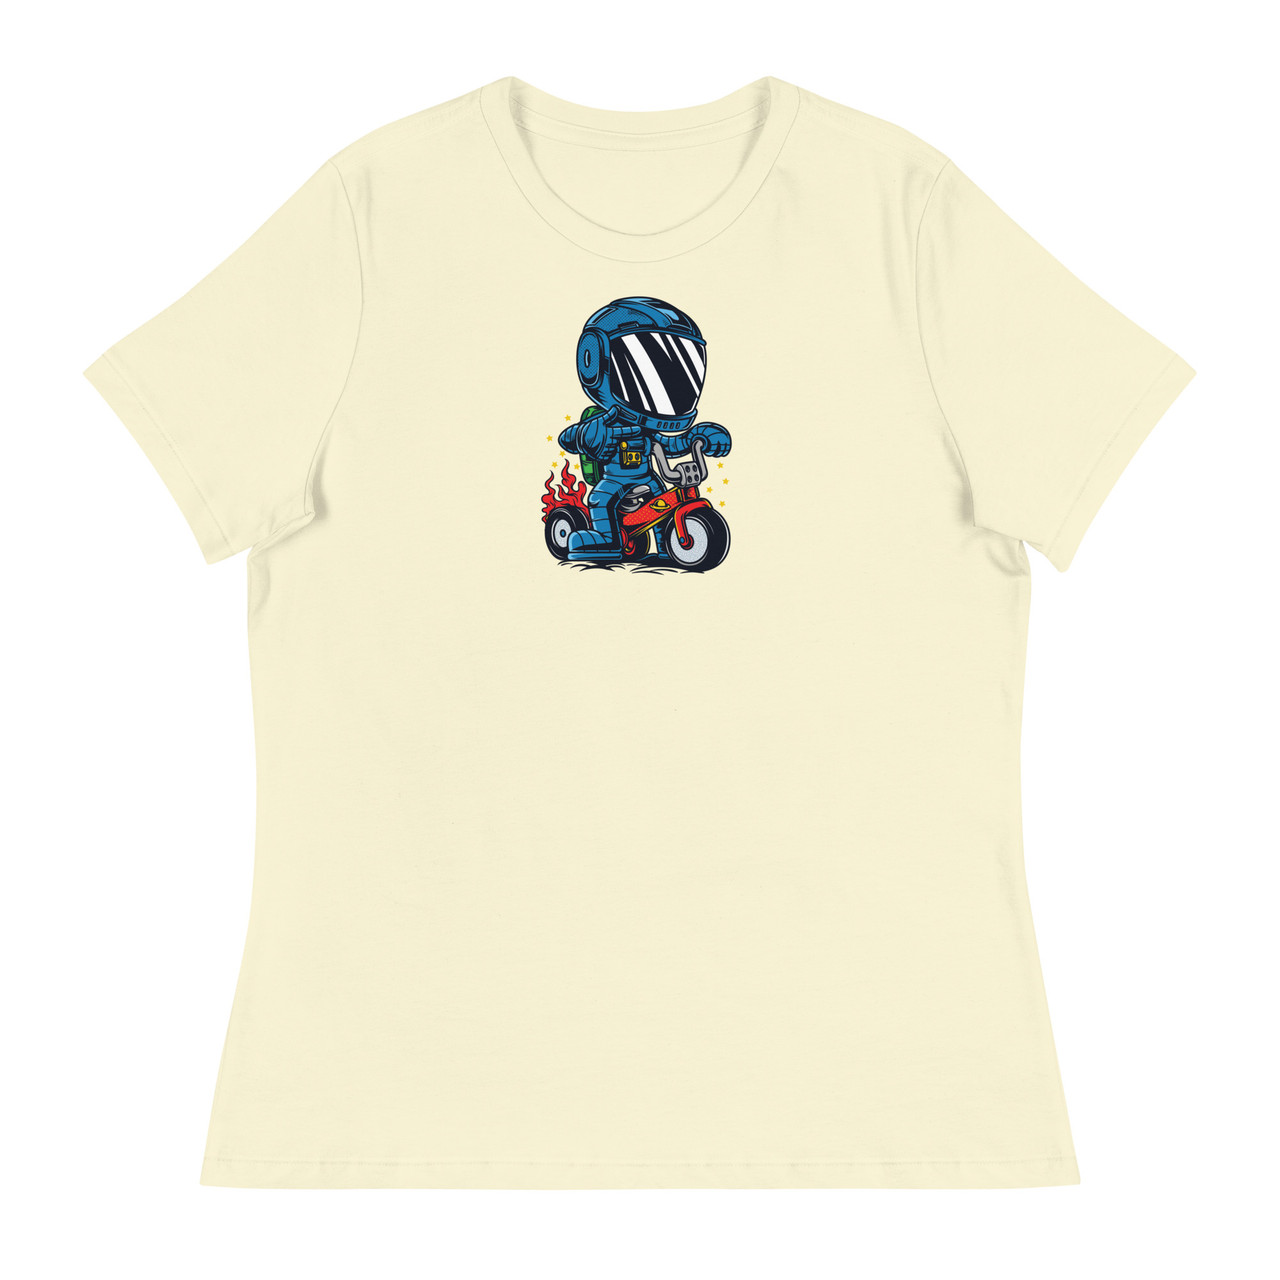 Space Scooter Women's Relaxed T-Shirt - Bella + Canvas 6400 